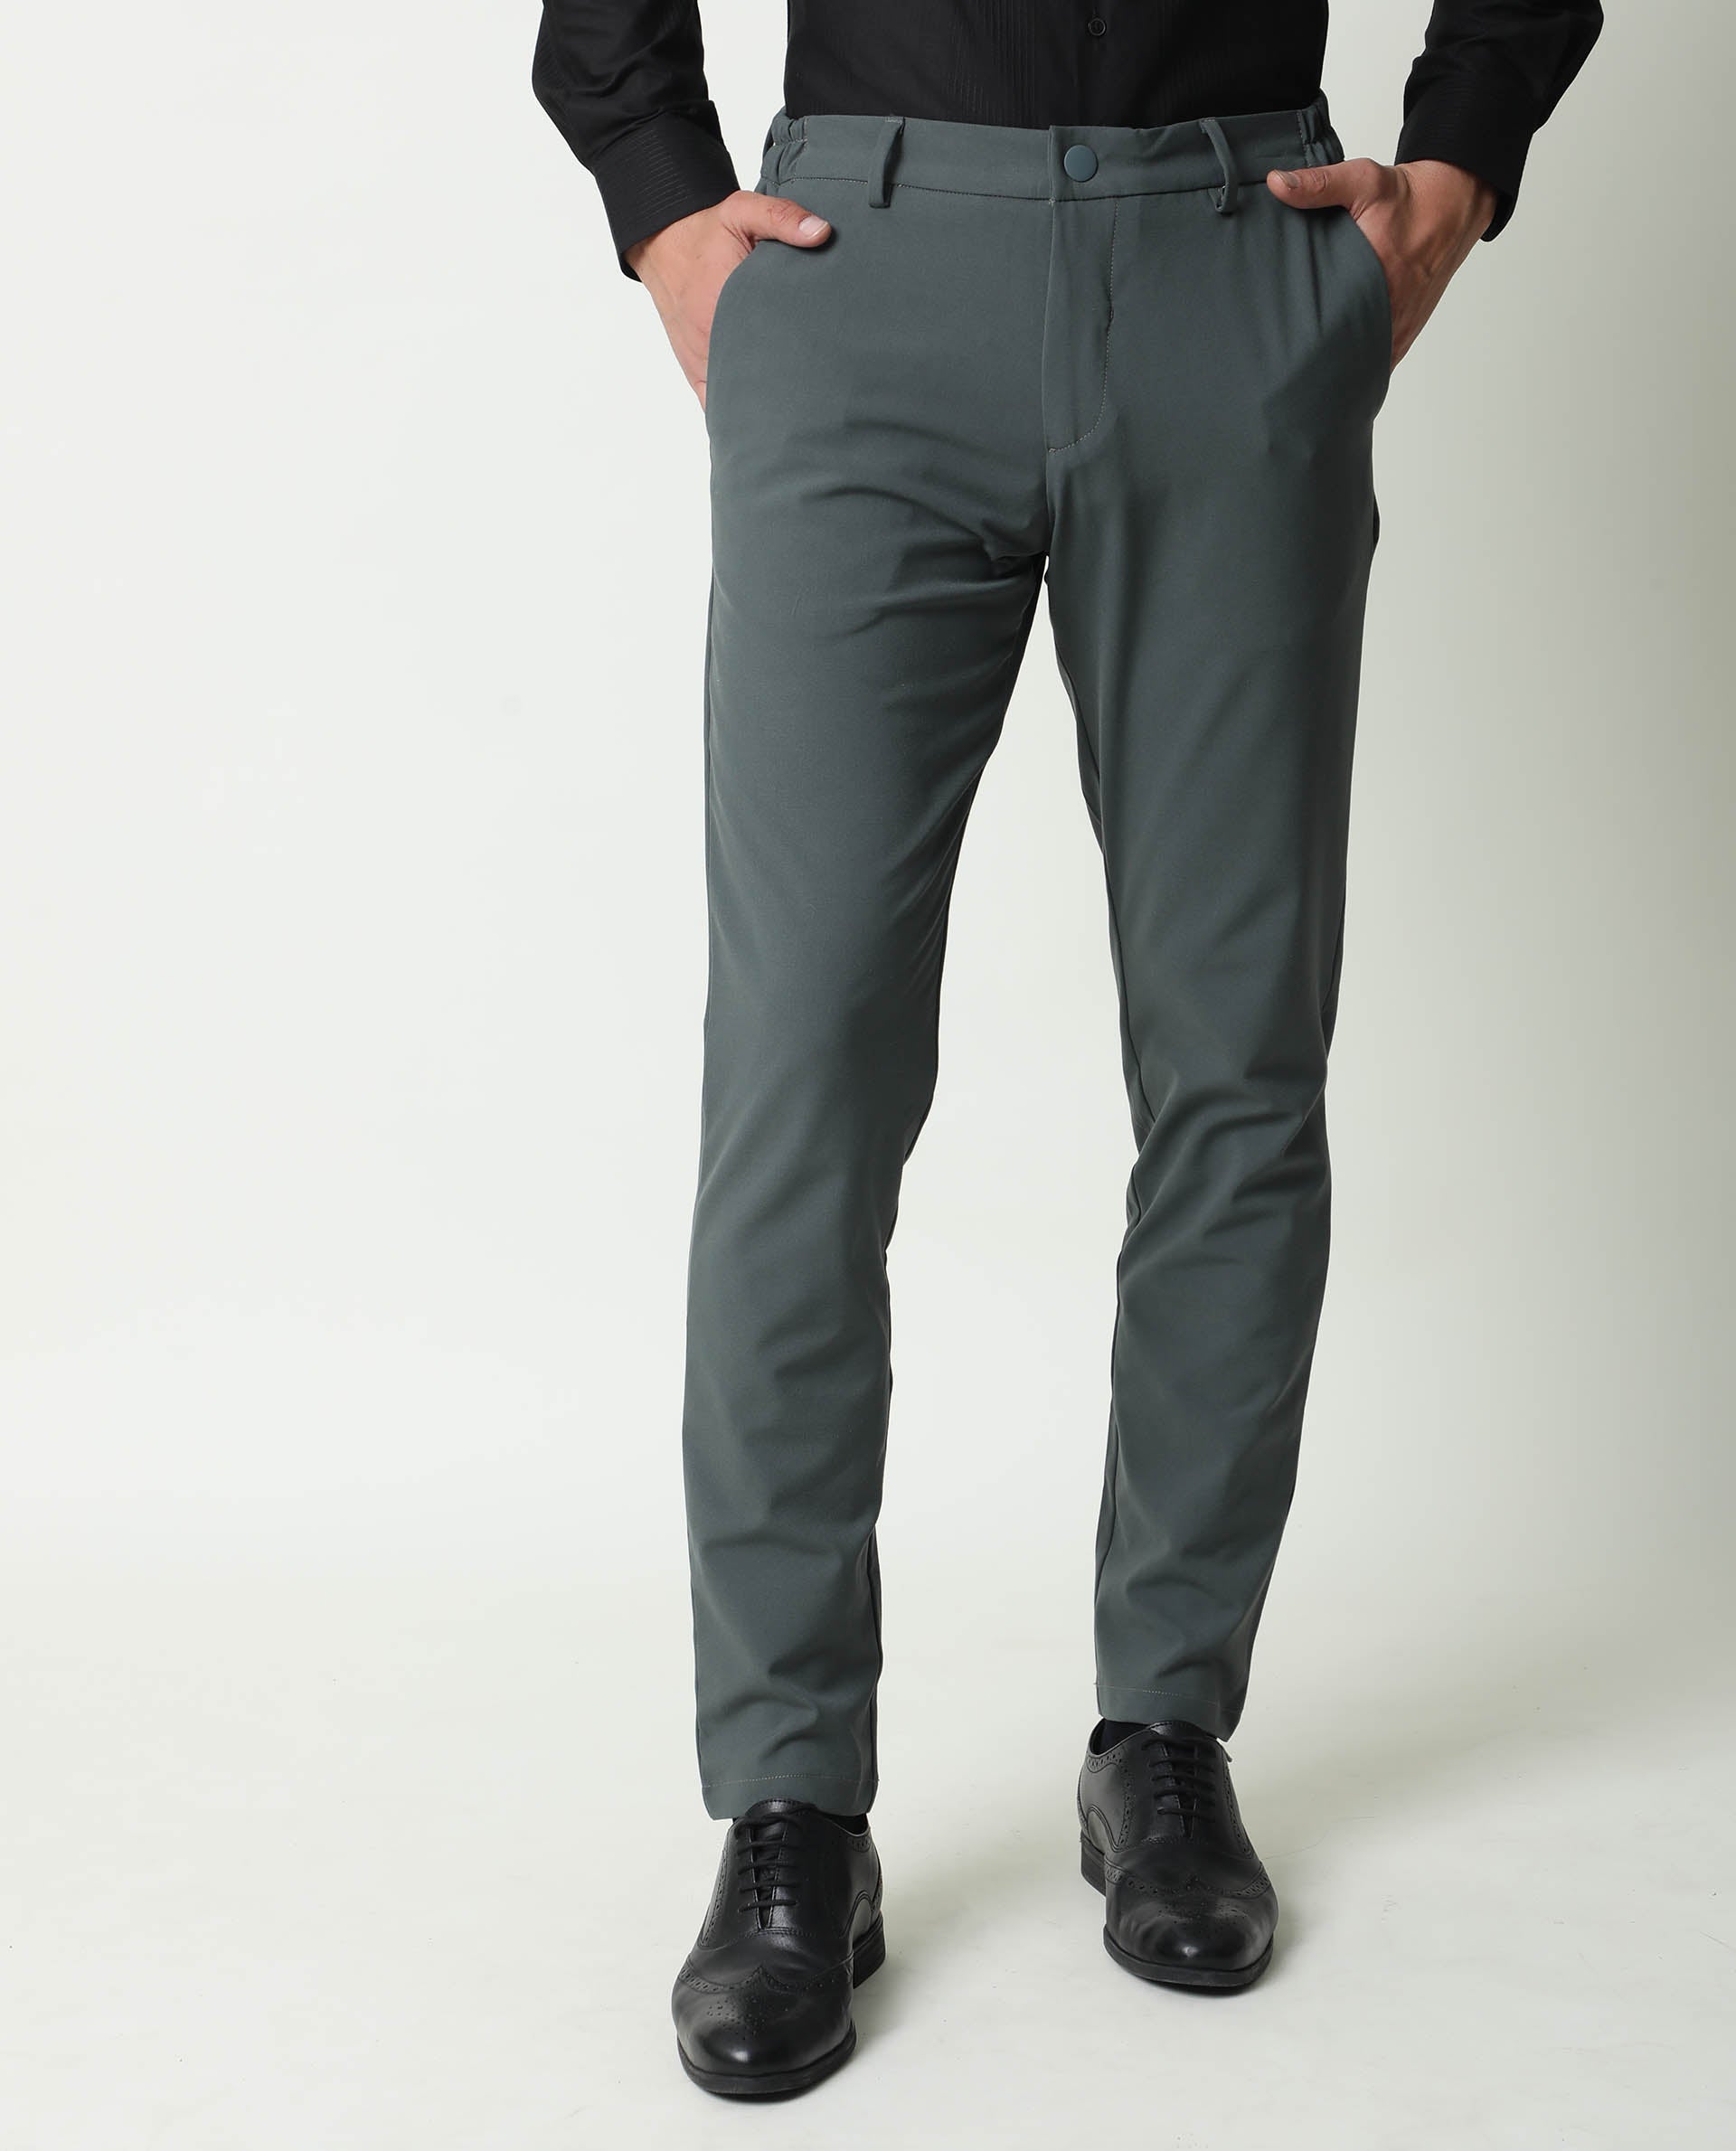 RARE RABBIT Trousers outlet - 1800 products on sale | FASHIOLA.co.uk